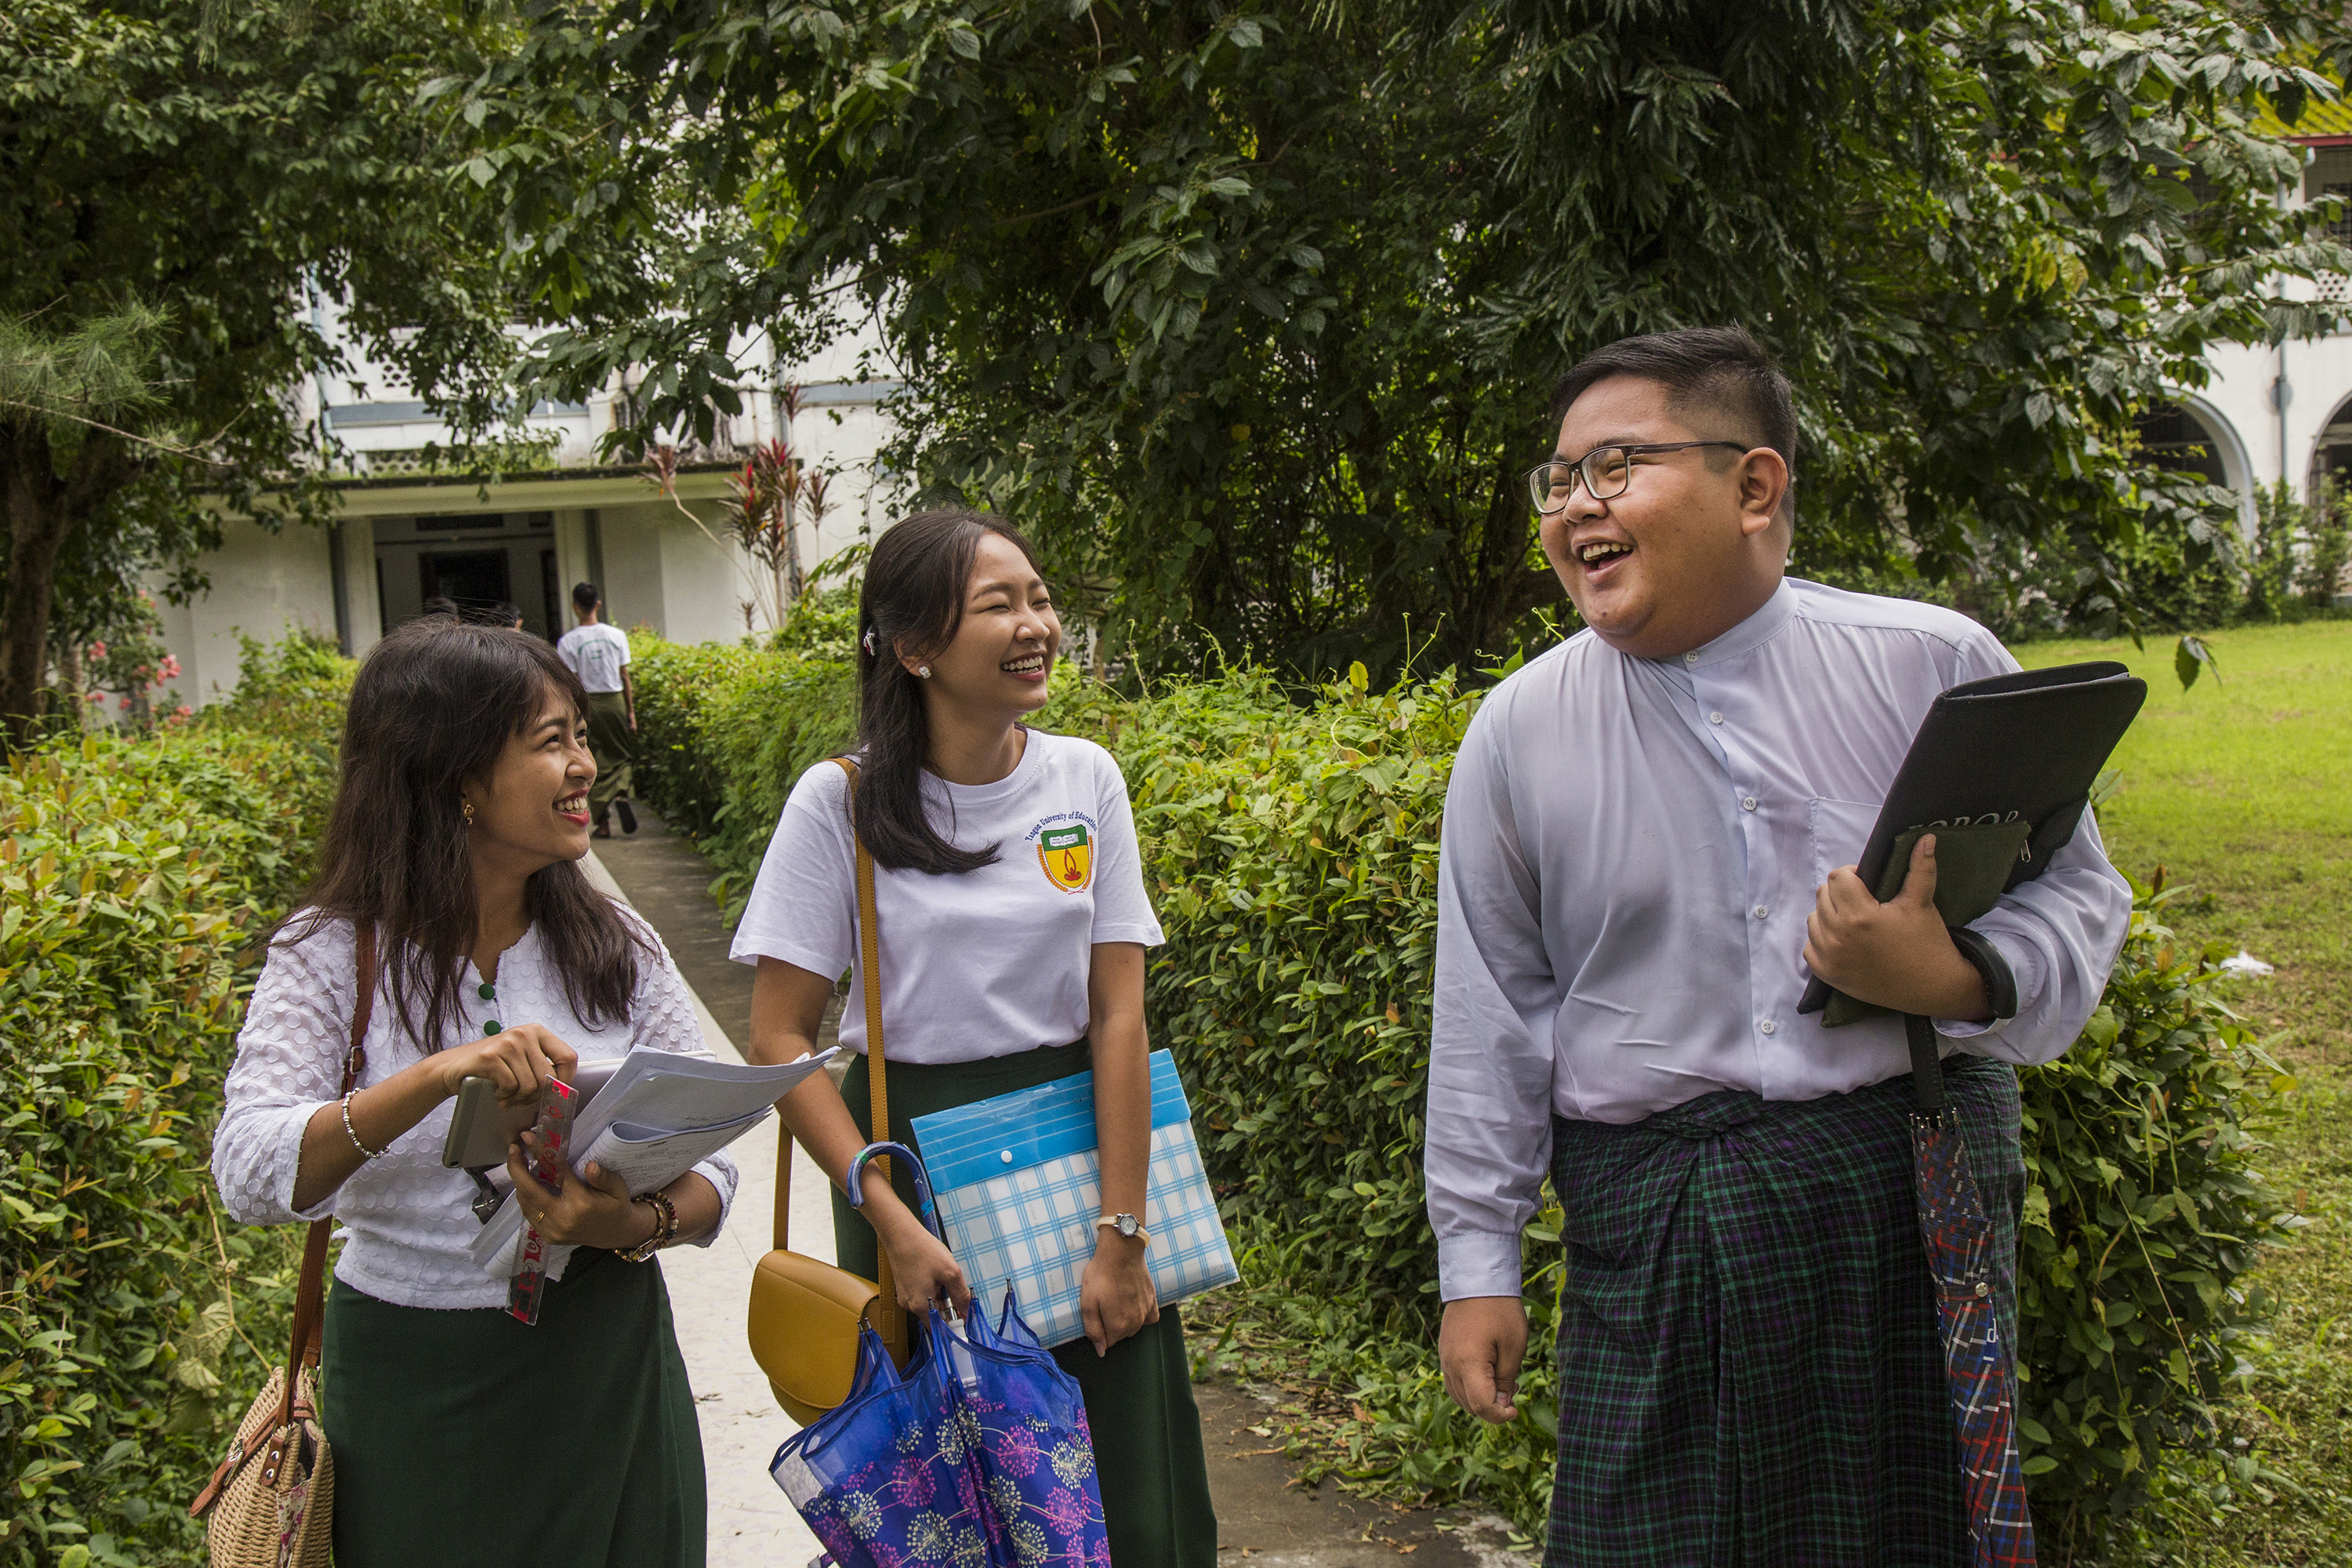 "The Future is in our Hands": Dialogue for Peace Graduate Builds Capacity of Youth in Myanmar